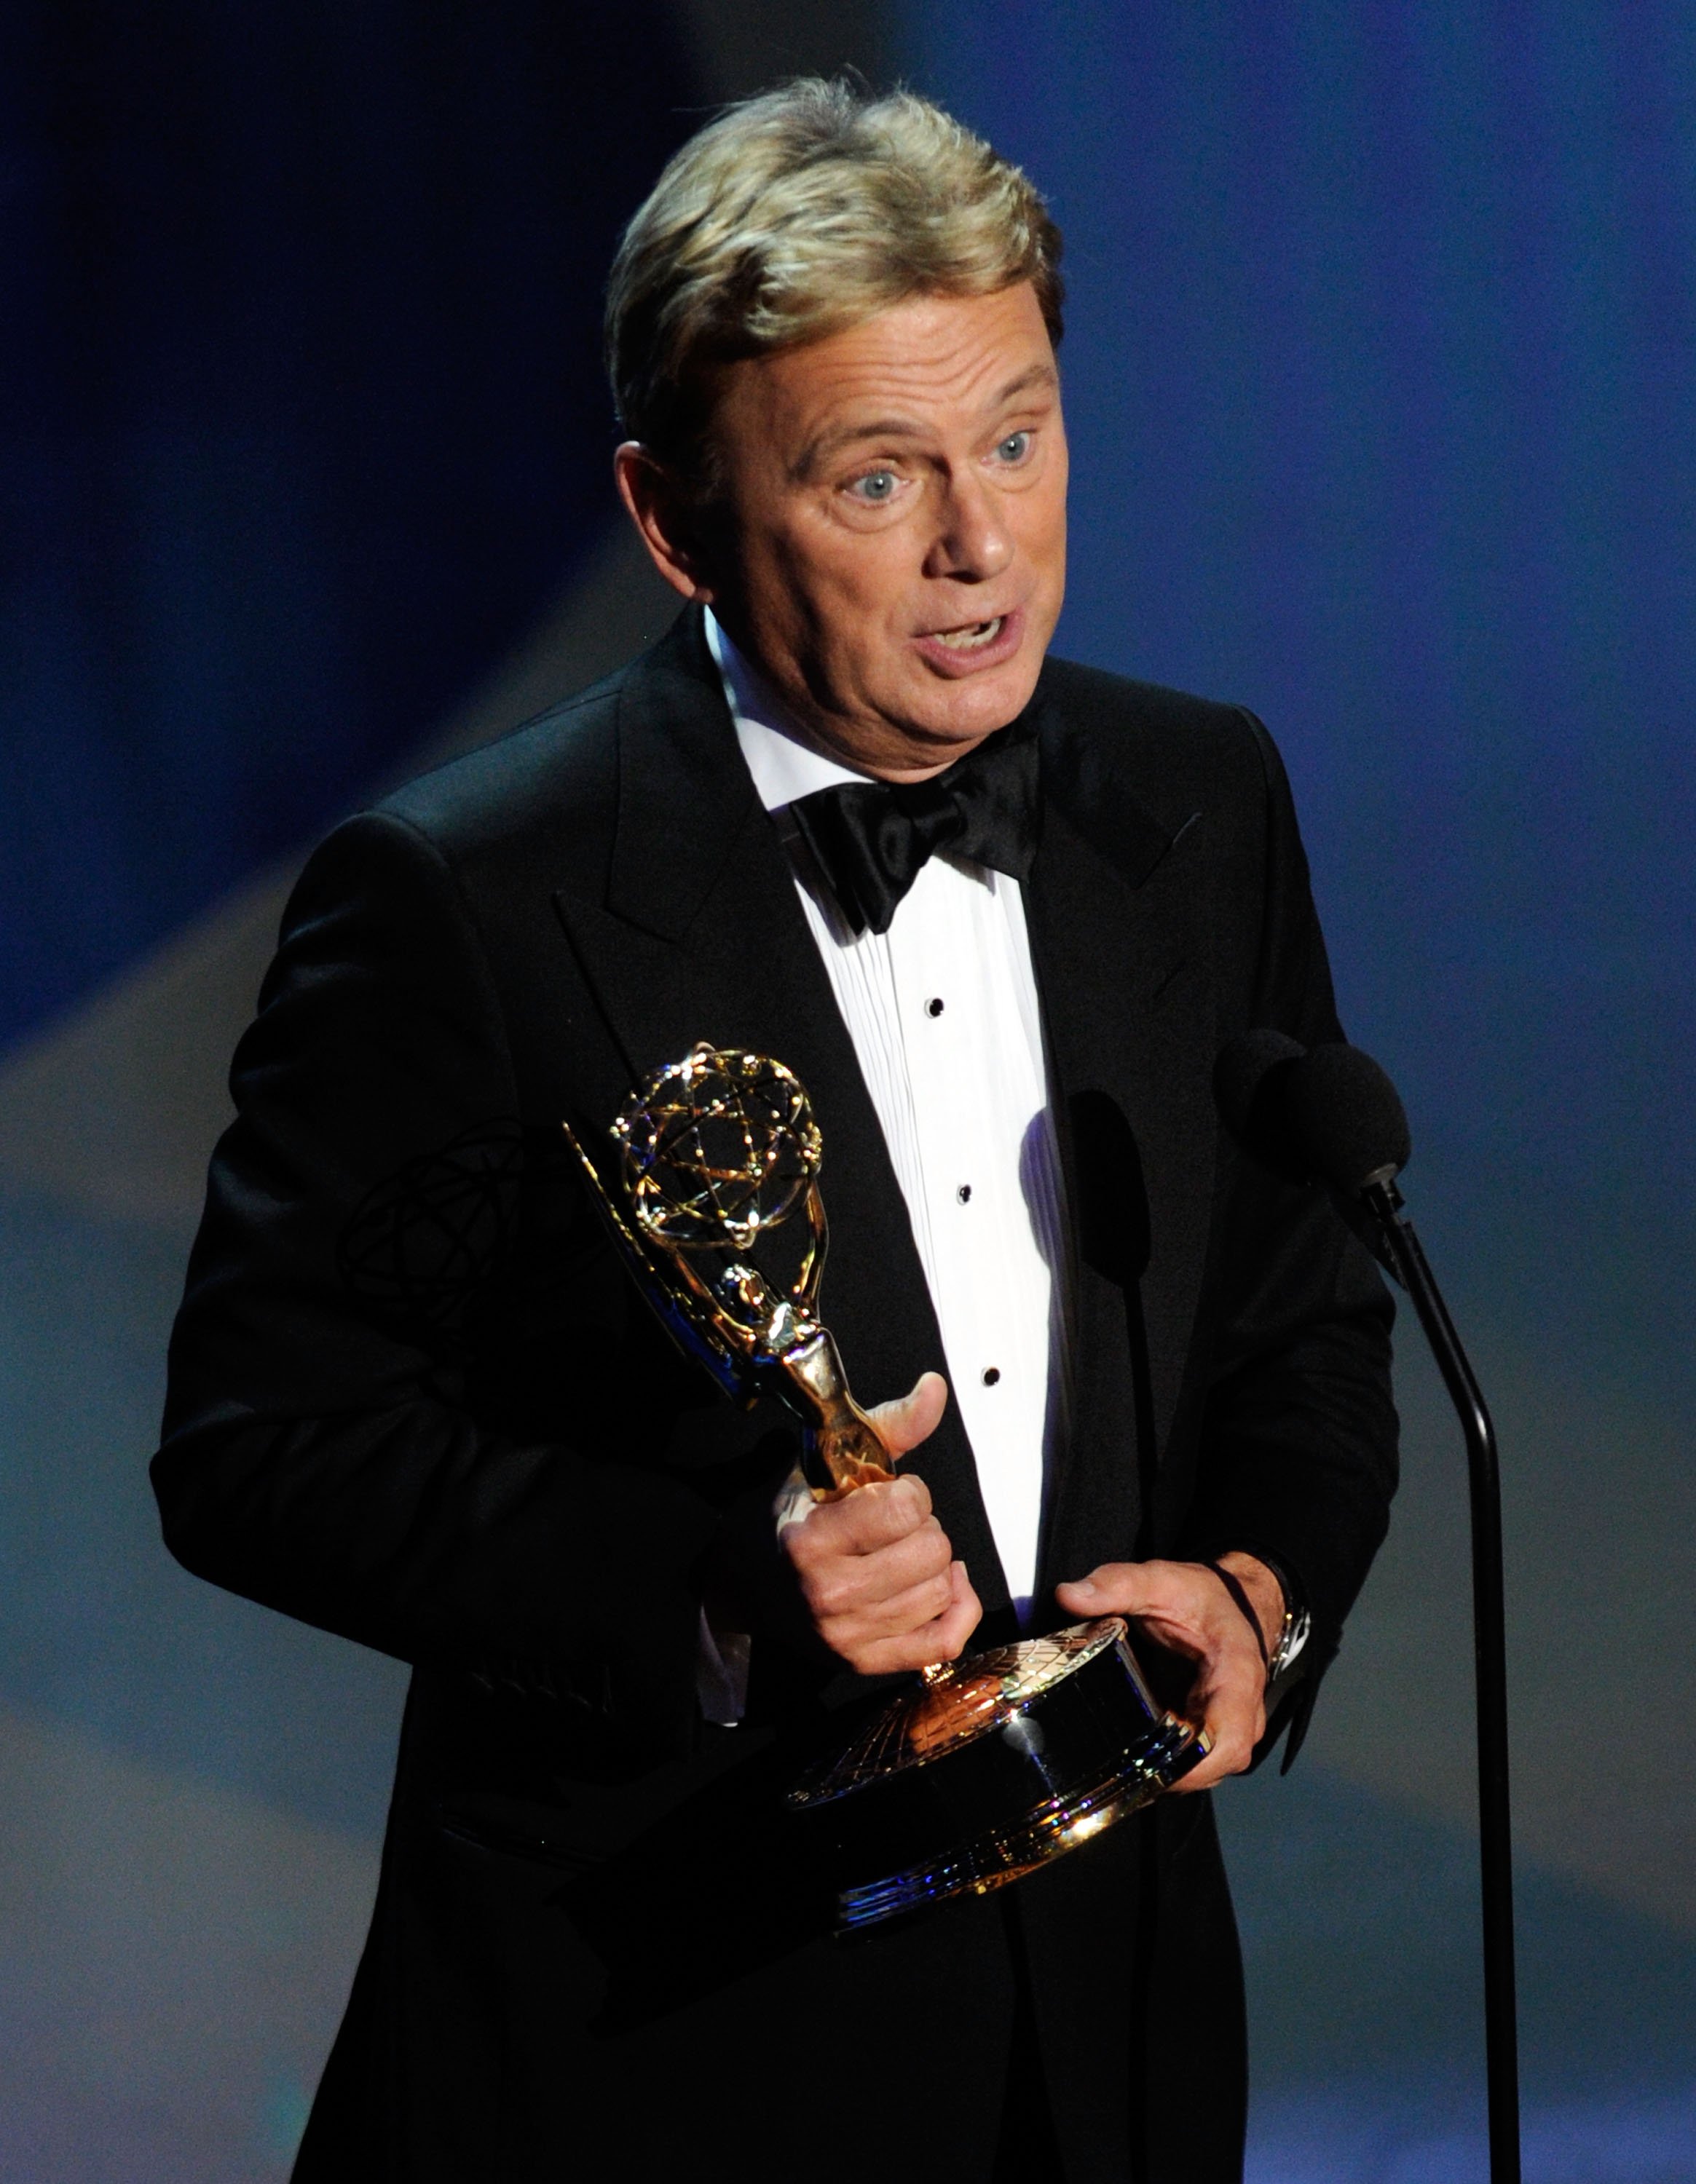 LAS VEGAS, NV - JUNE 19: Pat Sajak accepts the Lifetime Achievement Award onstage during the 38th Annual Daytime Entertainment Emmy Awards held at the Las Vegas Hilton on June 19, 2011 in Las Vegas, Nevada. (Photo by Ethan Miller/Getty Images)